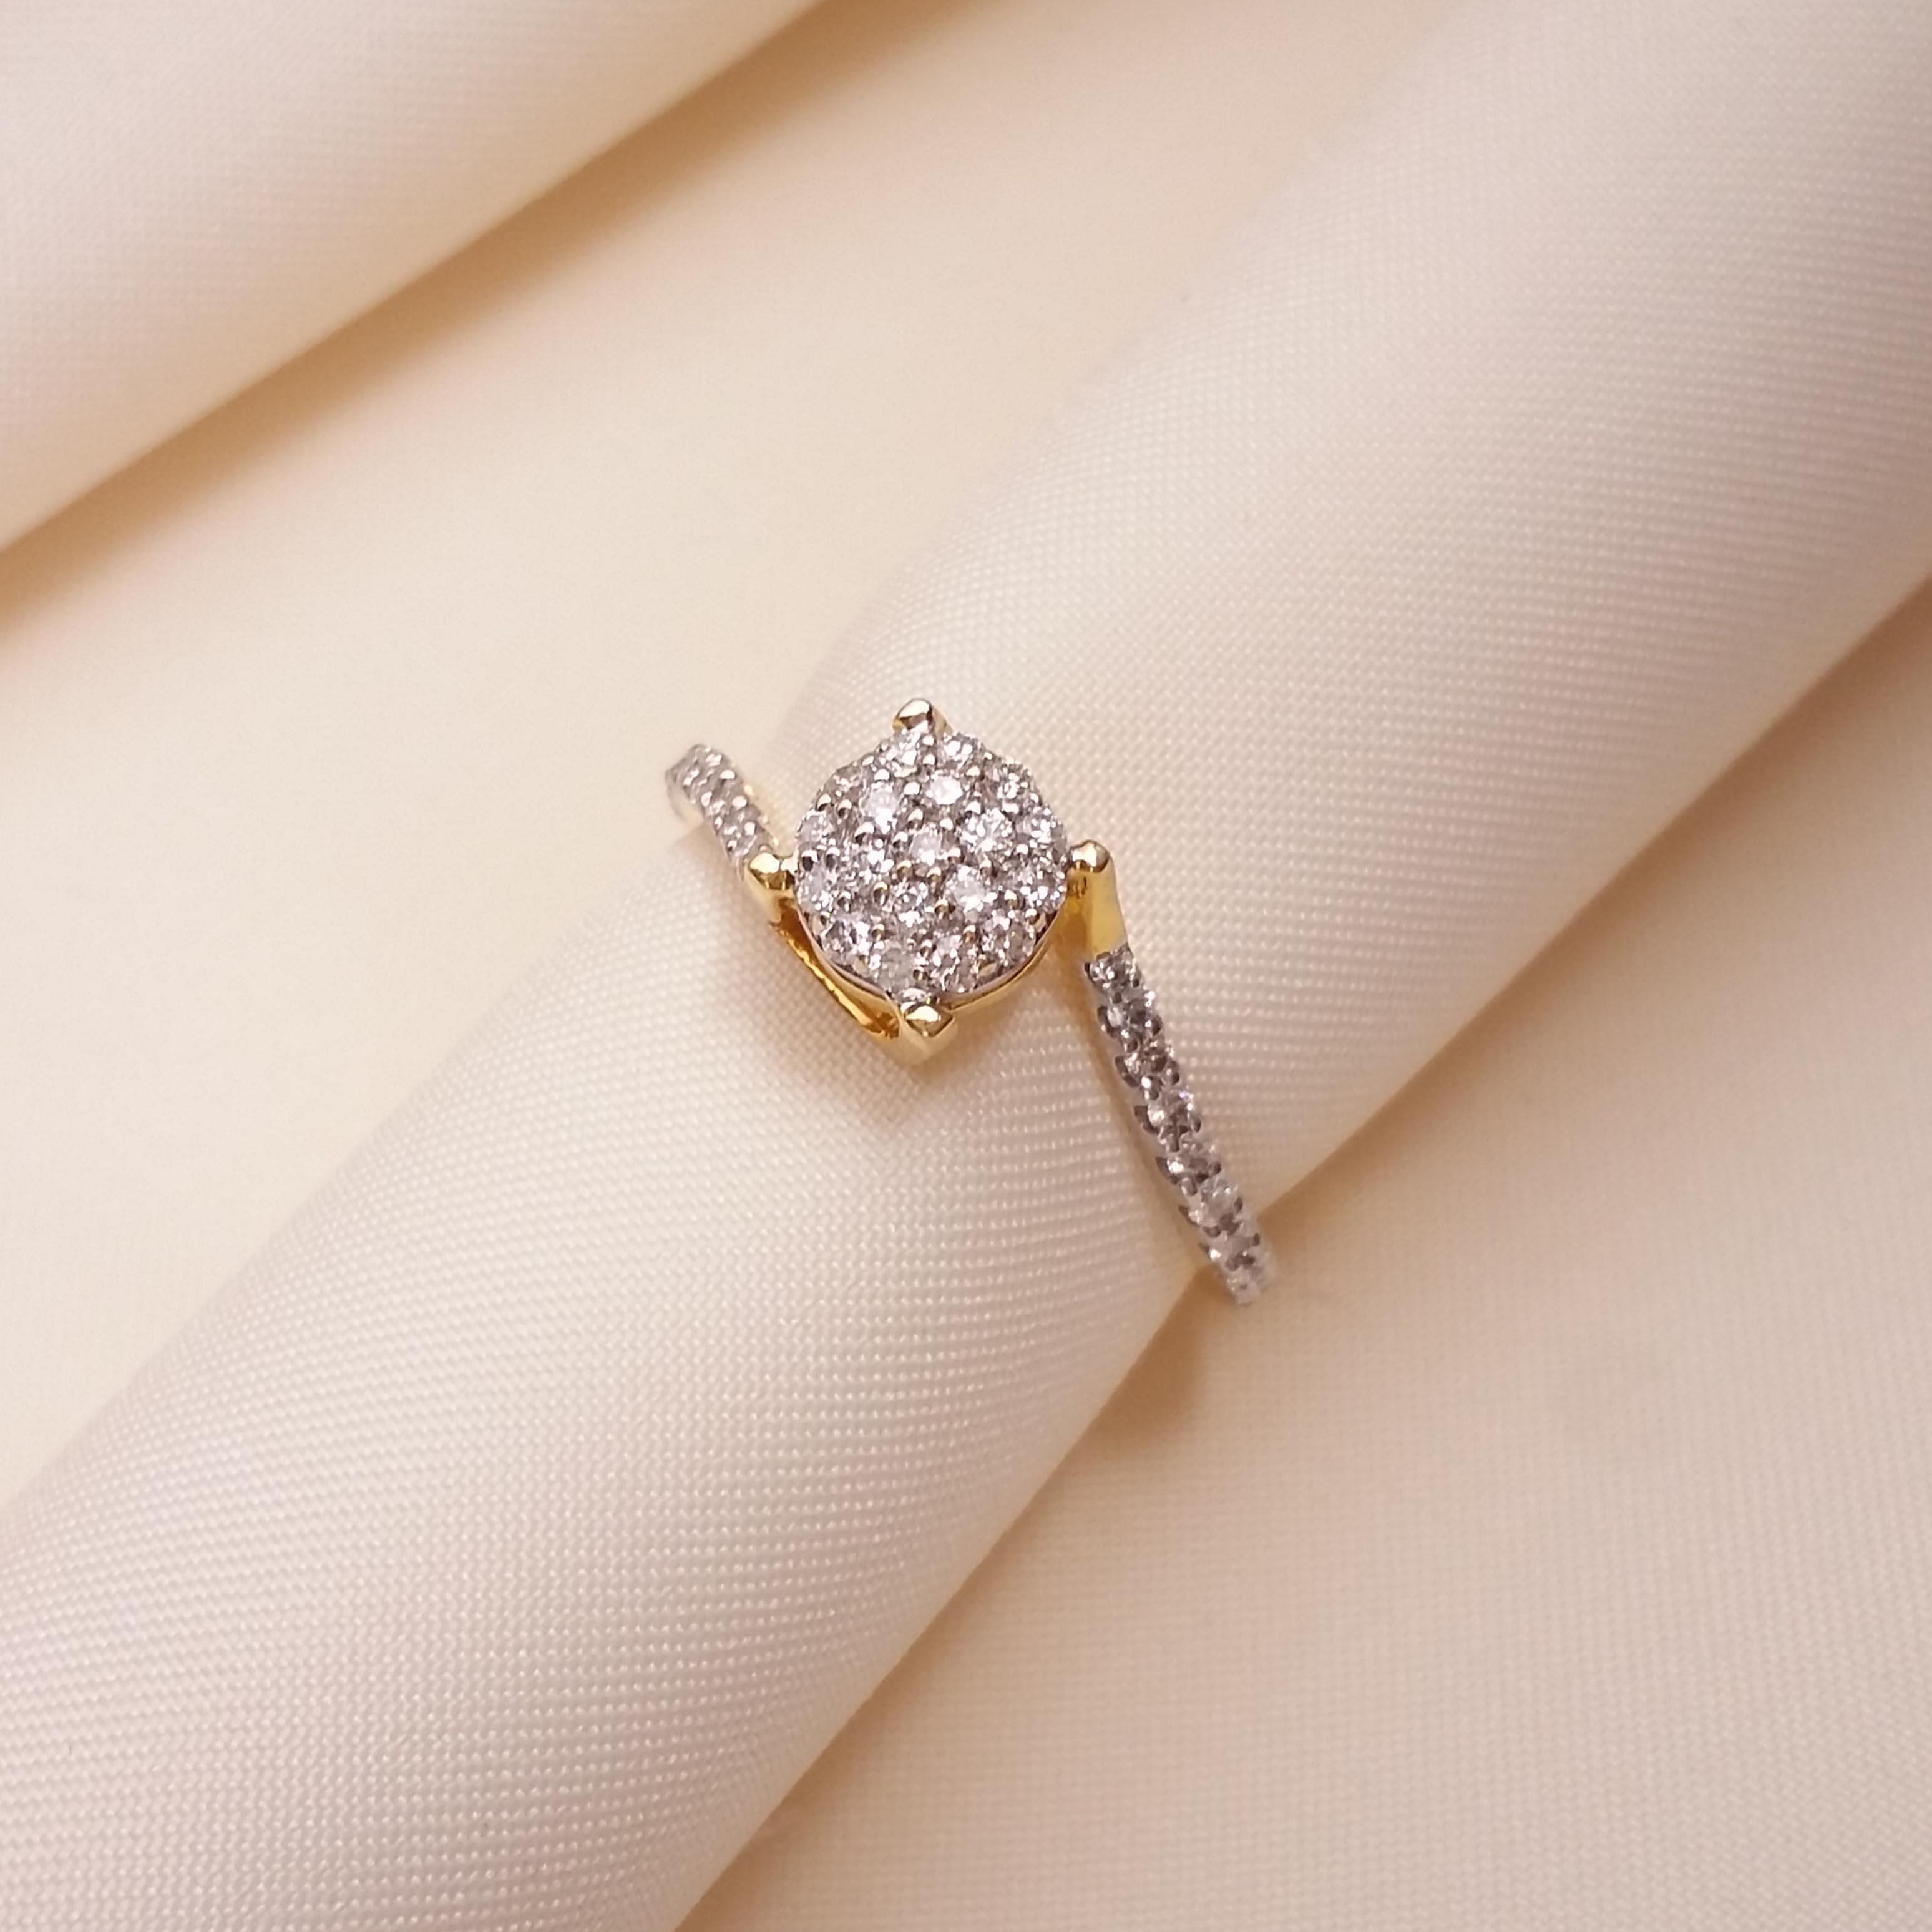 Unique Modern Engagement Rings | Unique Choices To Stand Out